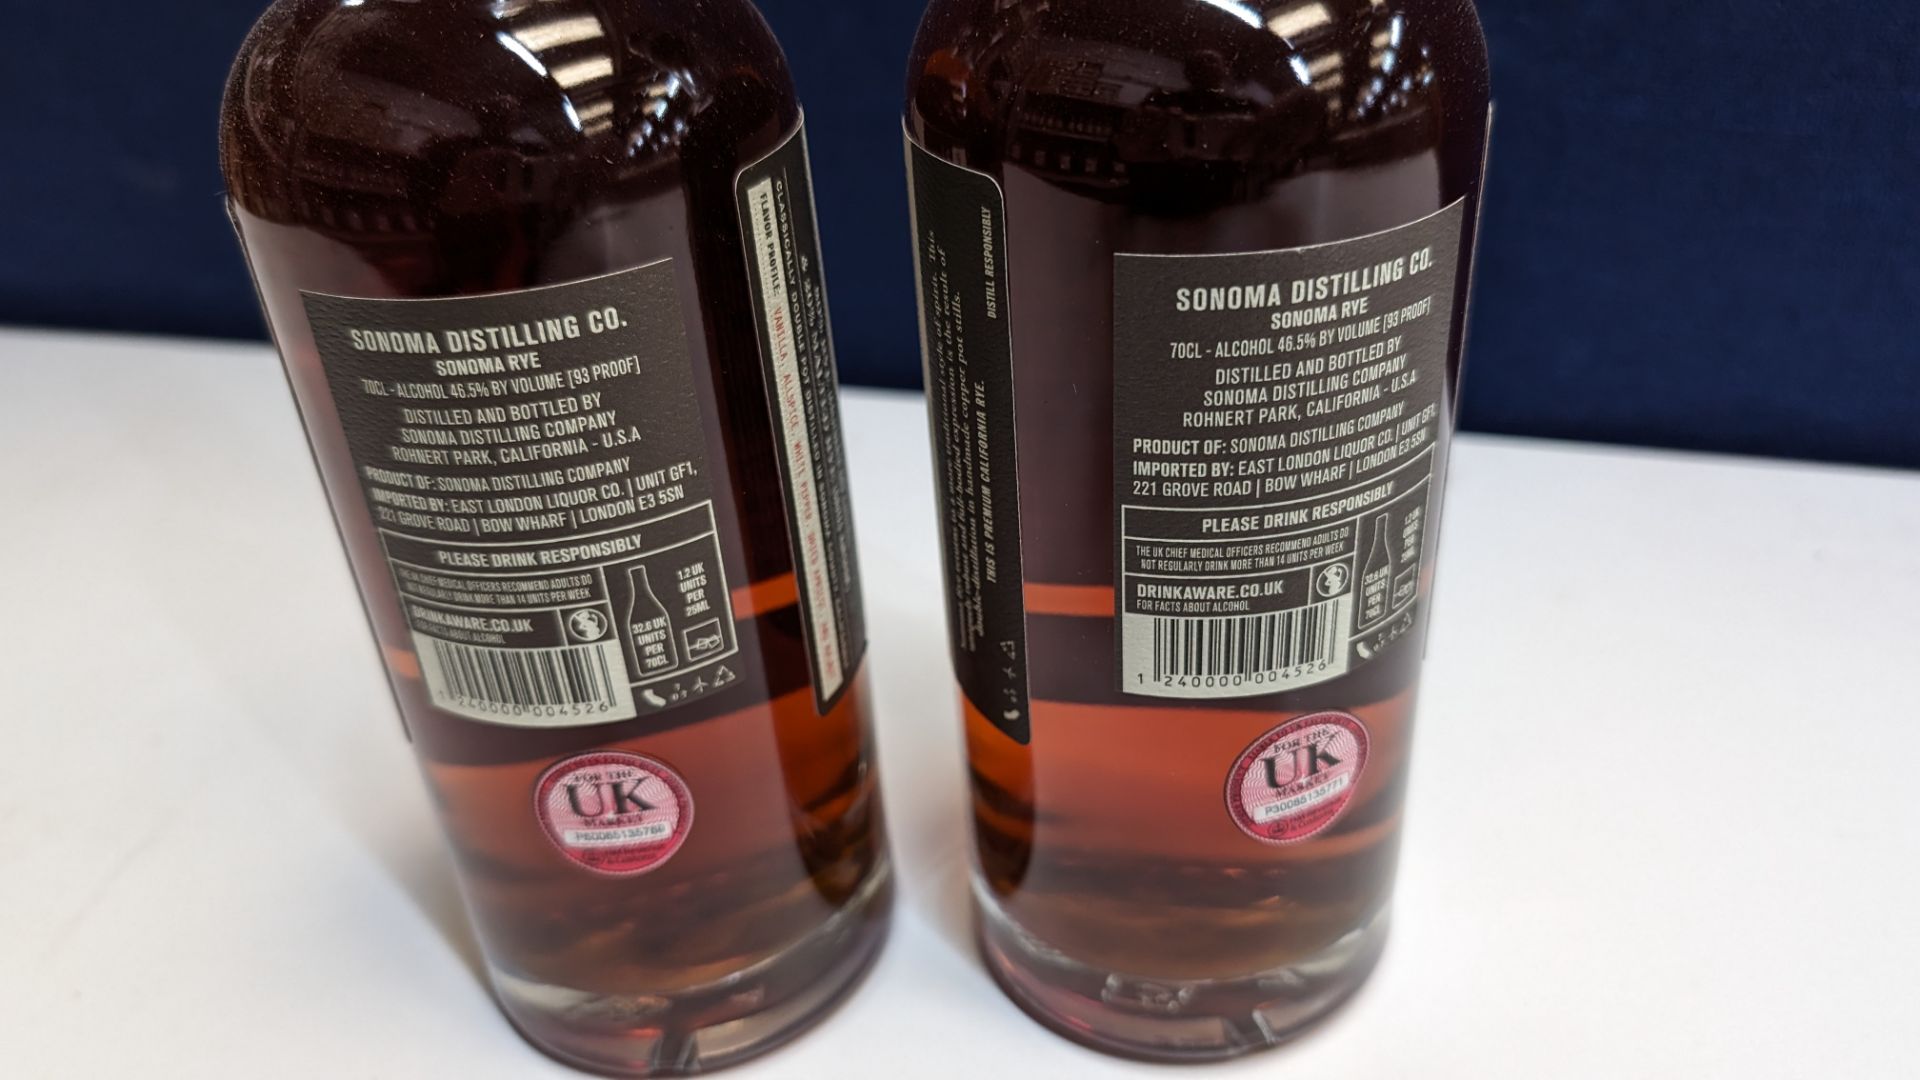 2 off 700ml bottles of Sonoma Rye Whiskey. 46.5% alc/vol (93 proof). Distilled and bottled in Sono - Image 6 of 7